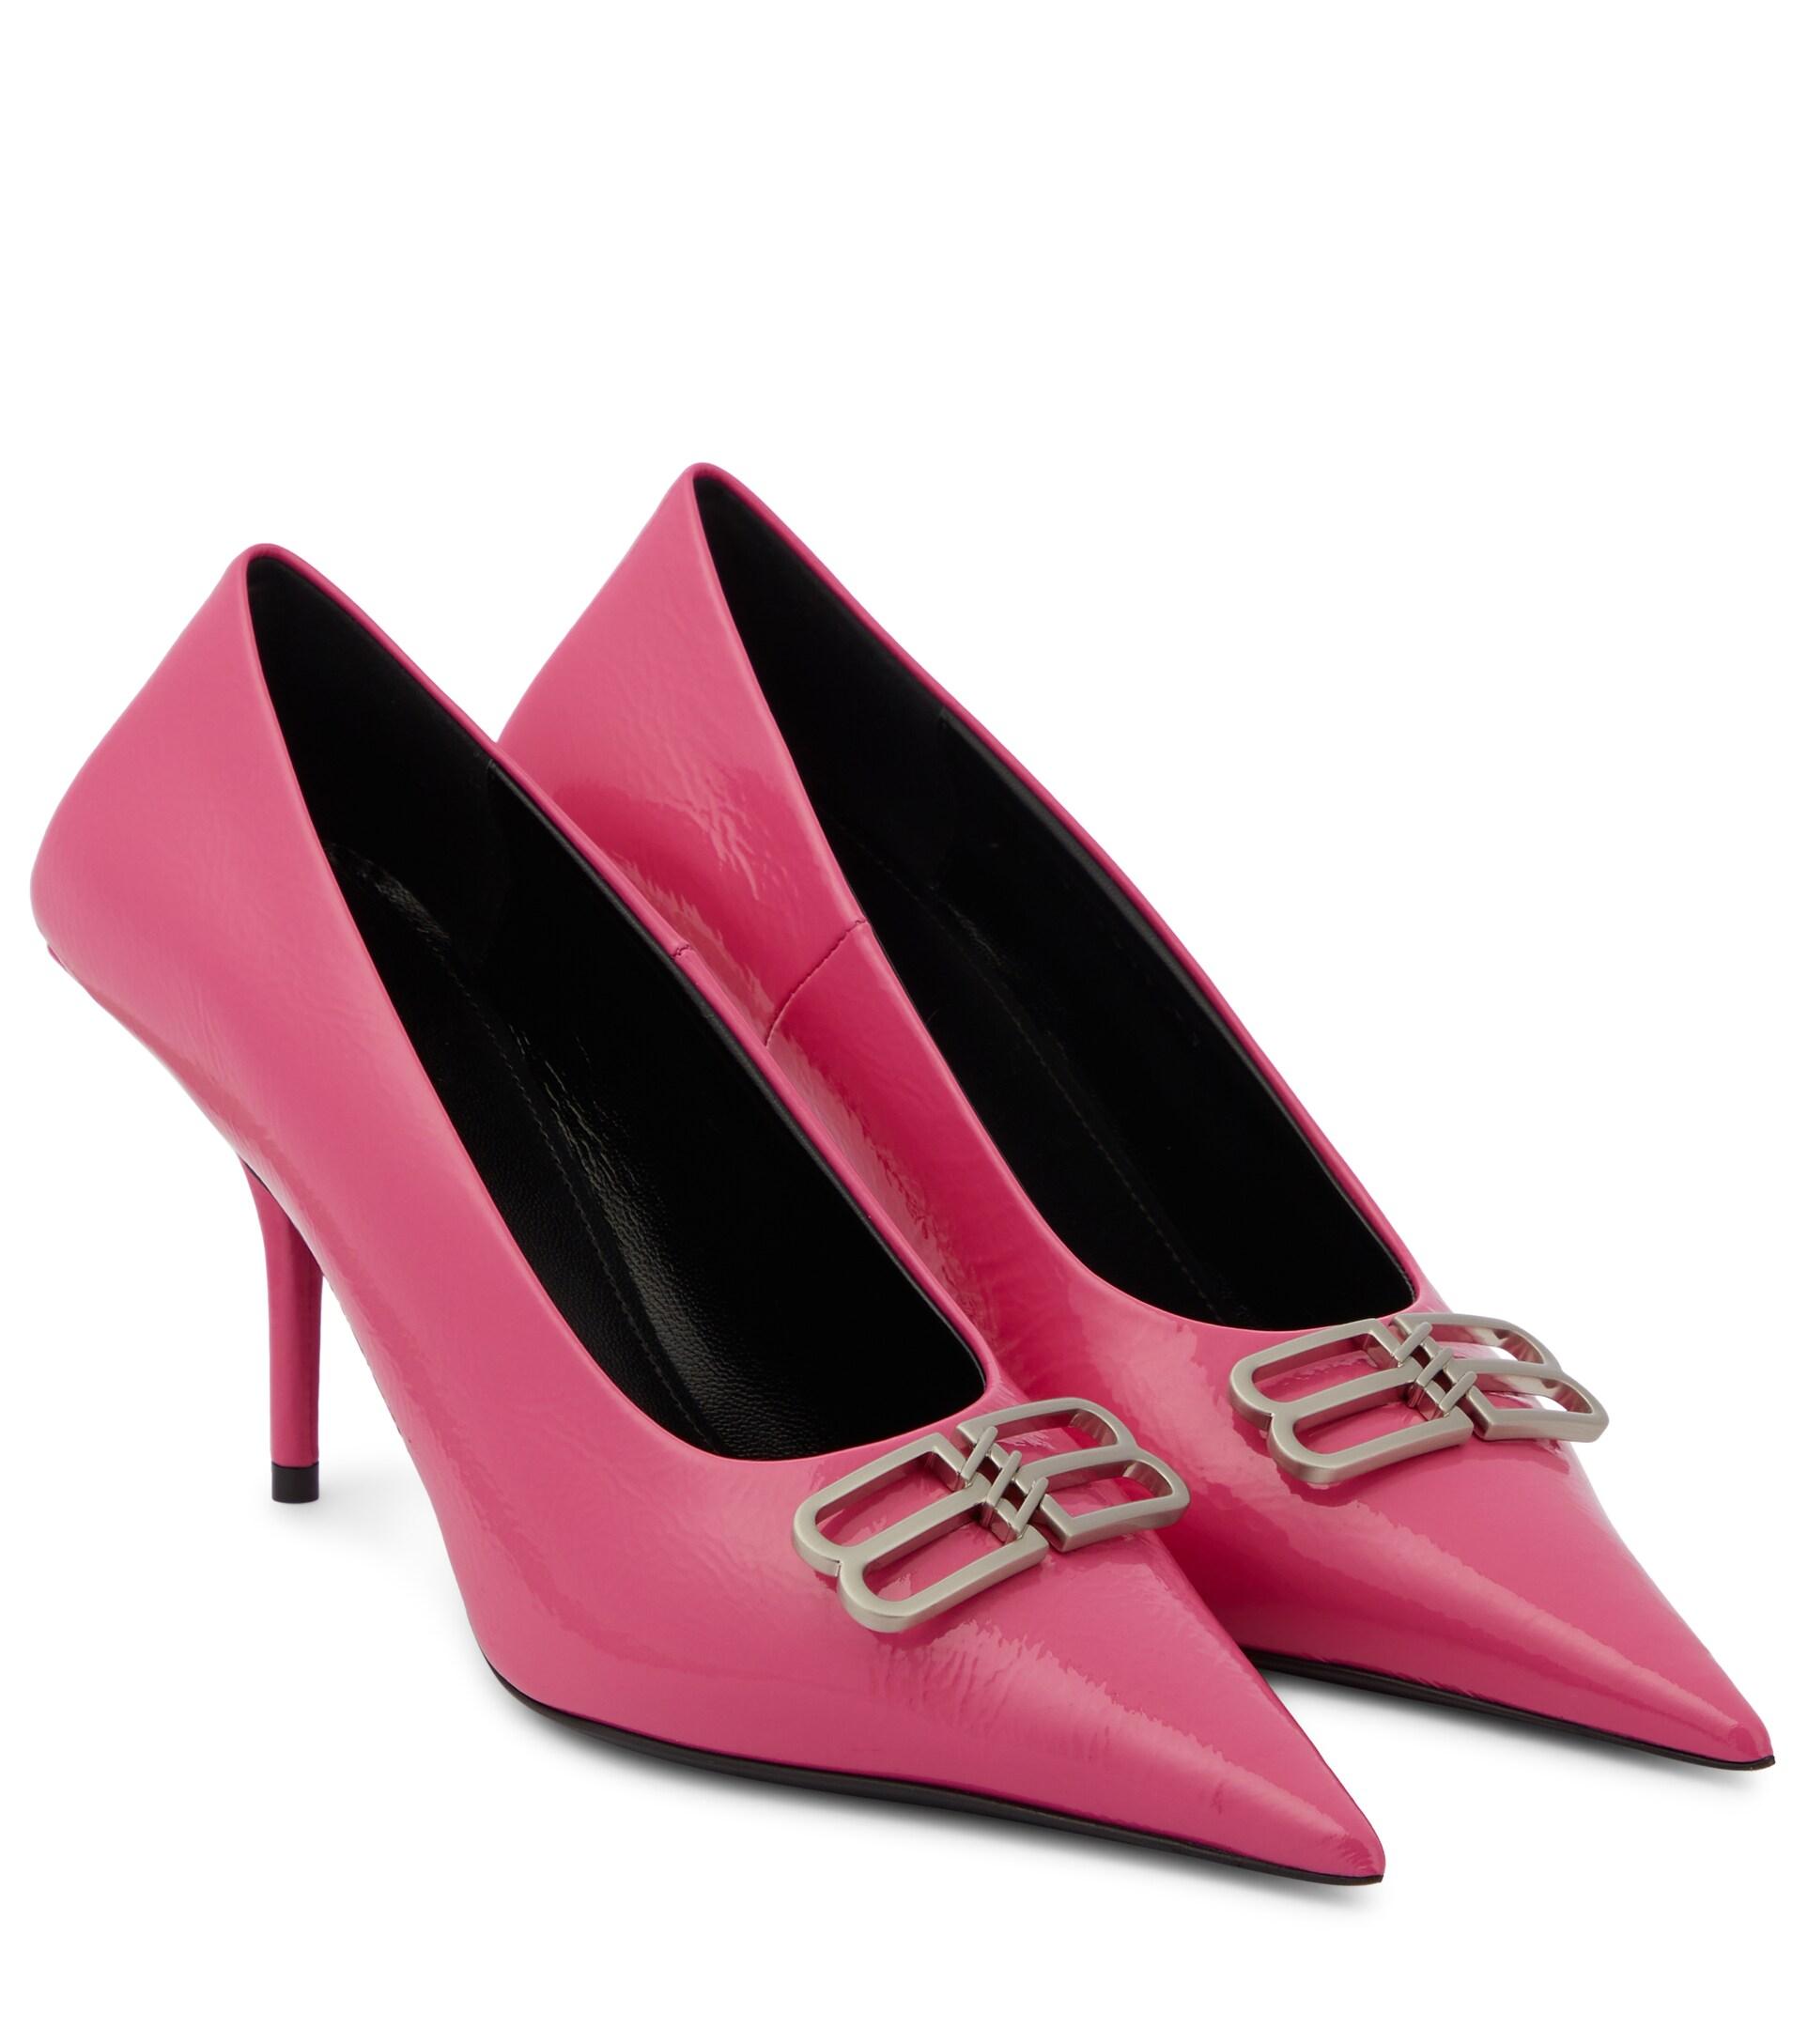 Balenciaga Square Knife Bb Leather Pumps in Pink | Lyst